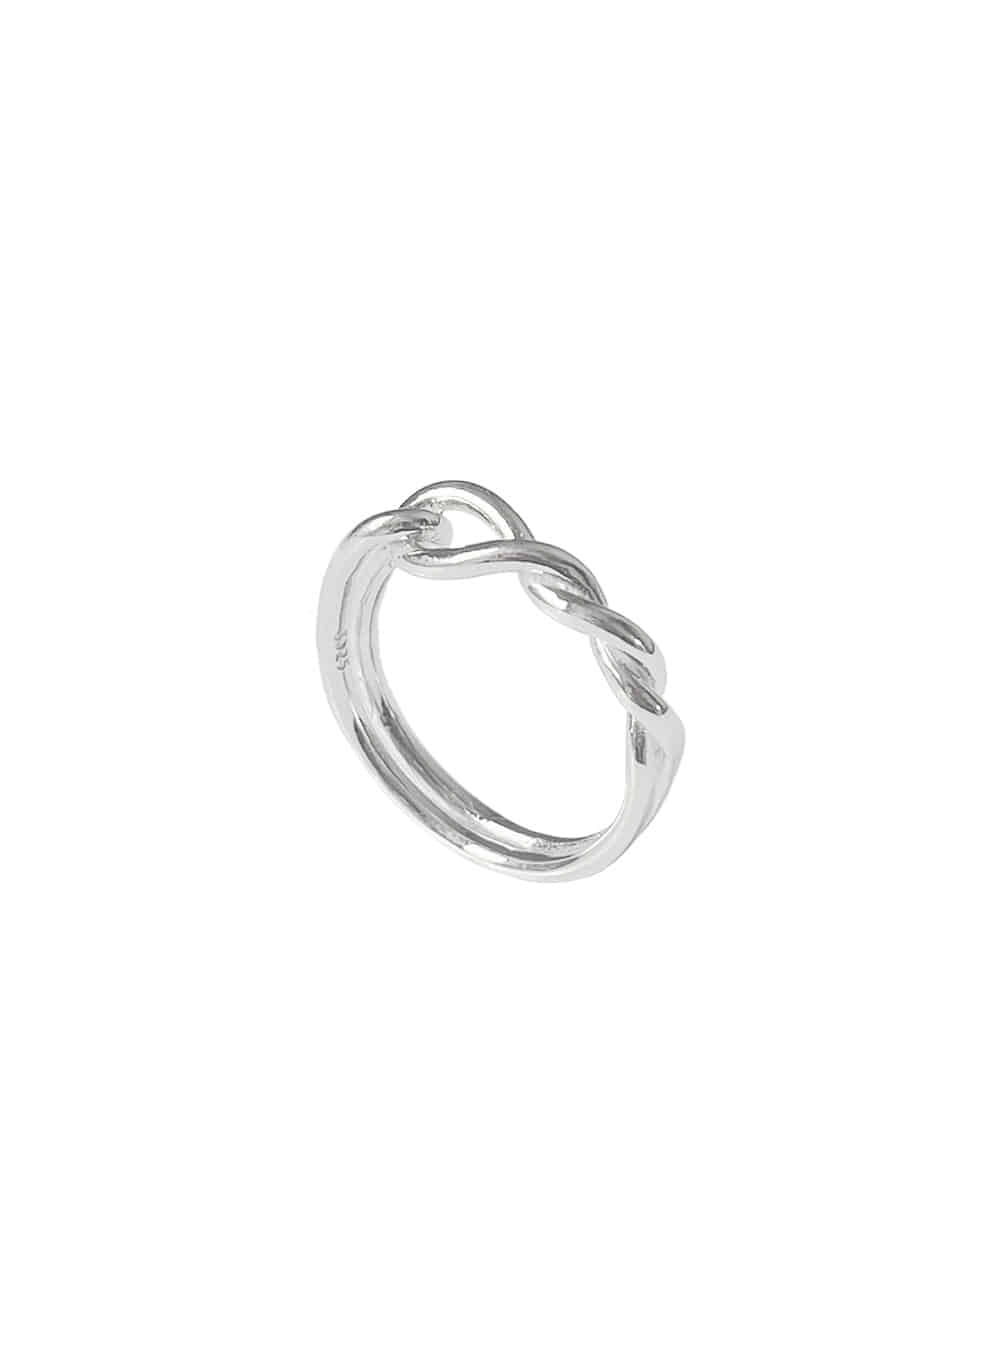 Front twist ring